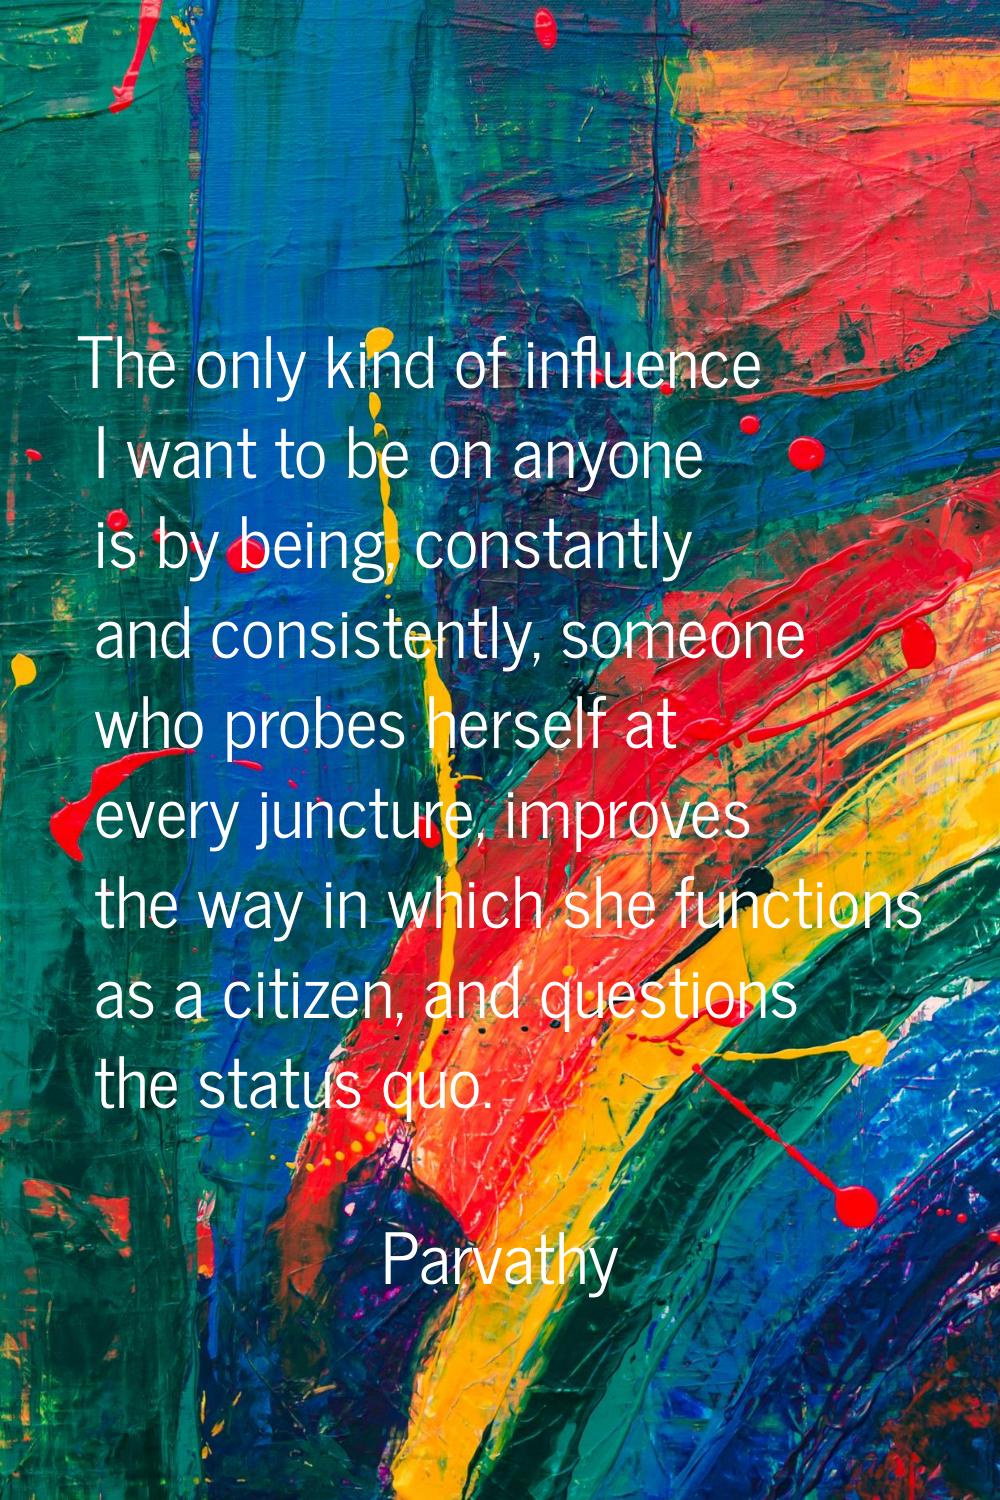 The only kind of influence I want to be on anyone is by being, constantly and consistently, someone